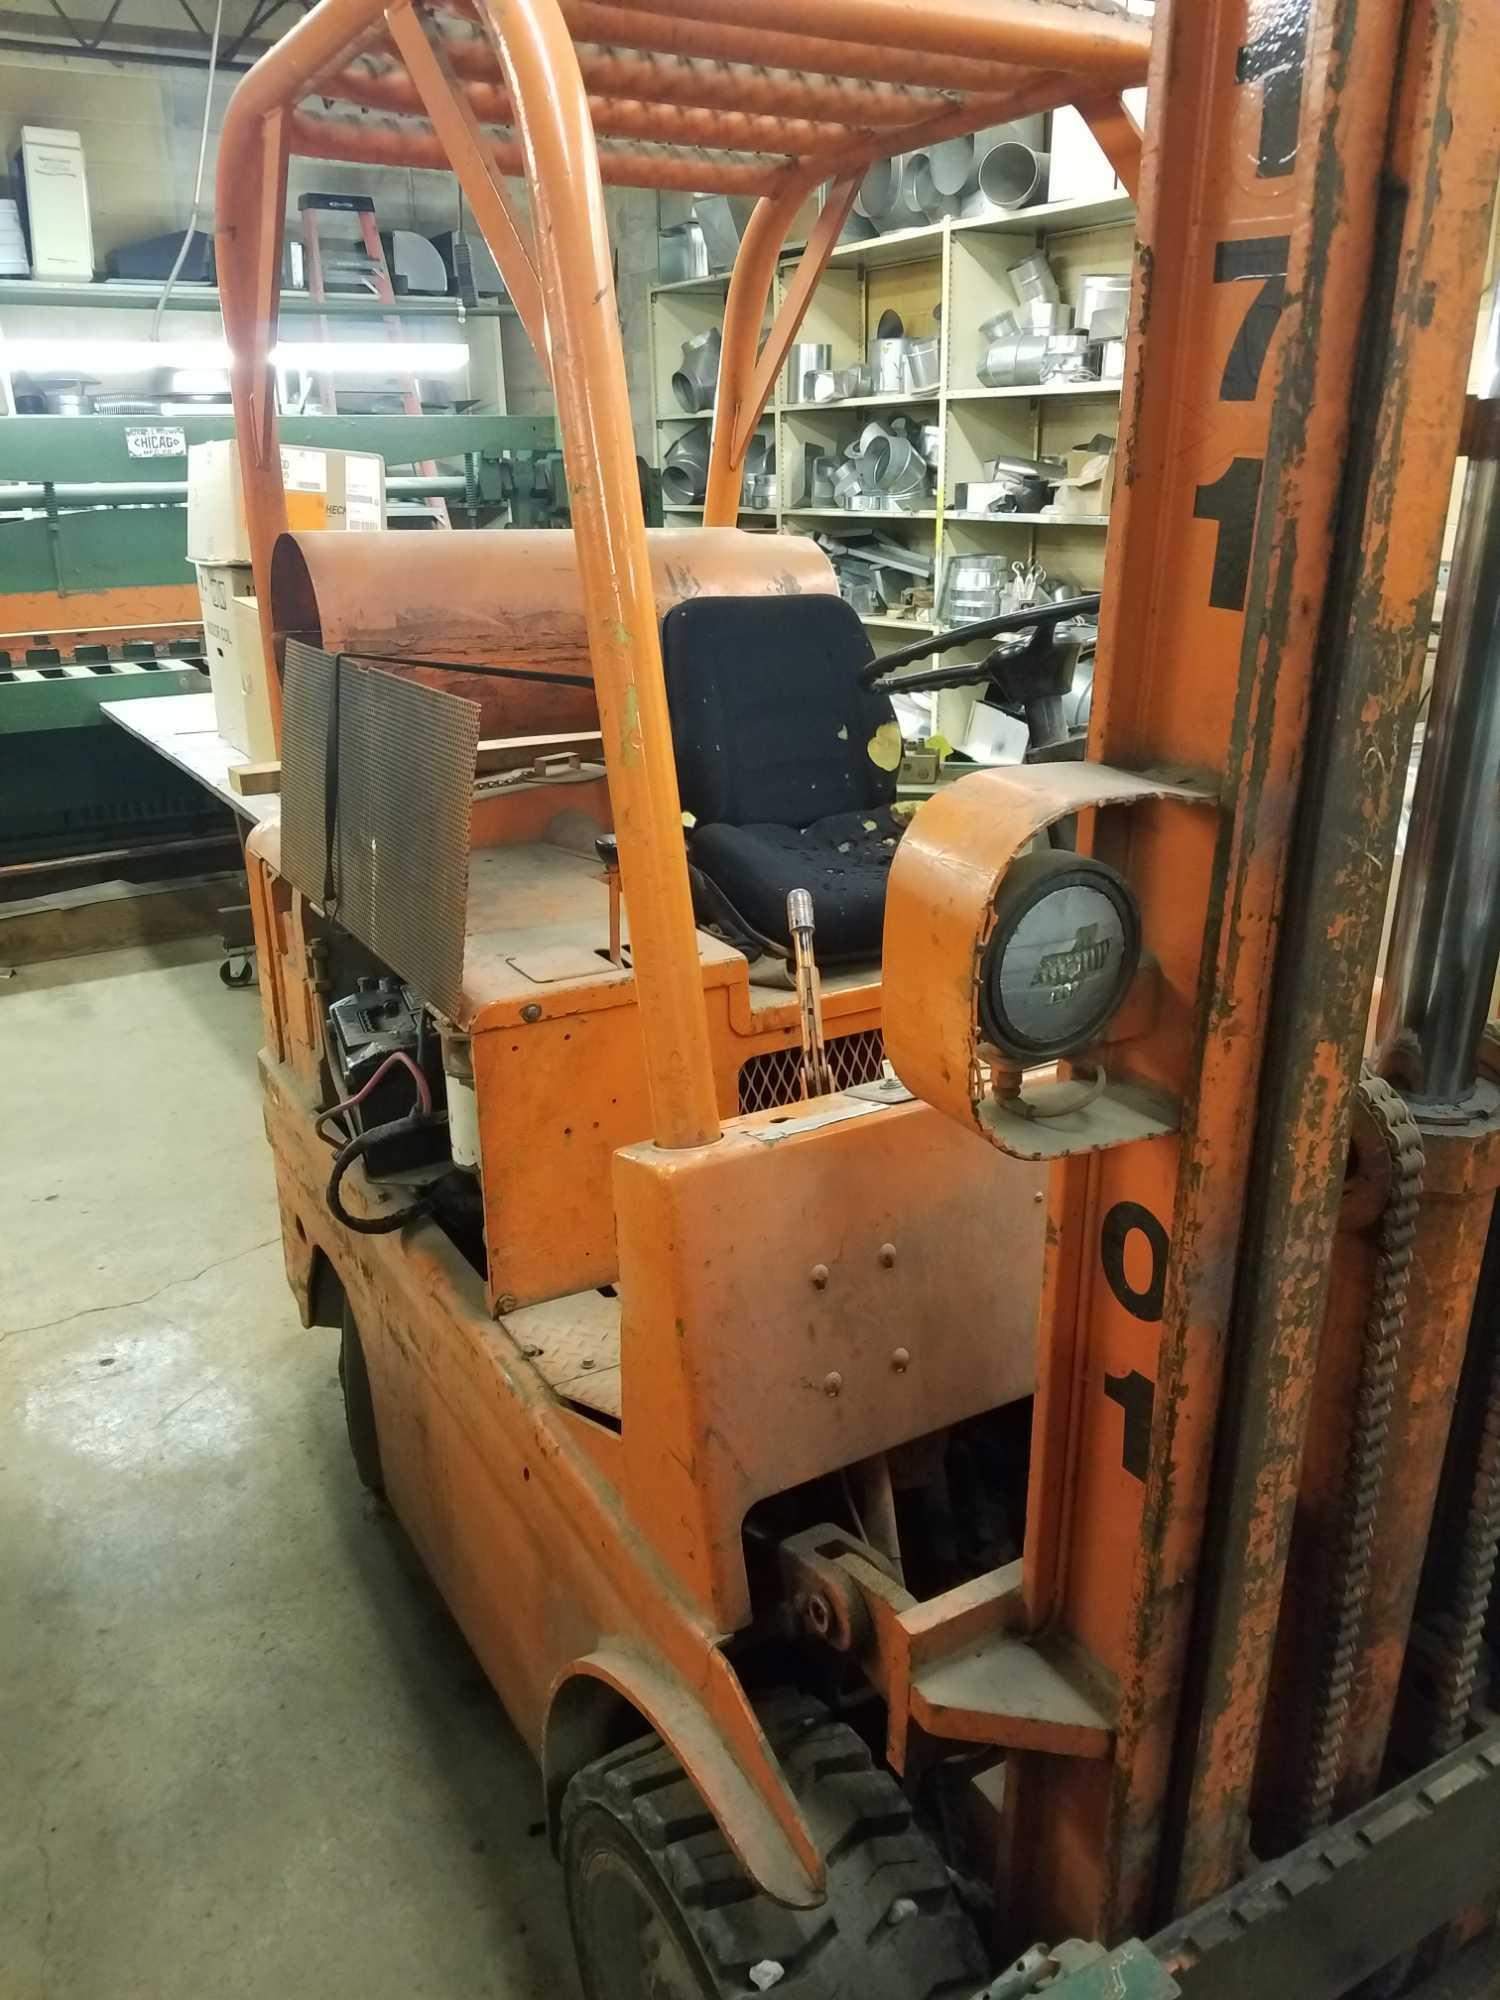 Yale double mast fork lift, propane, shows 689hrs, no capacity plate